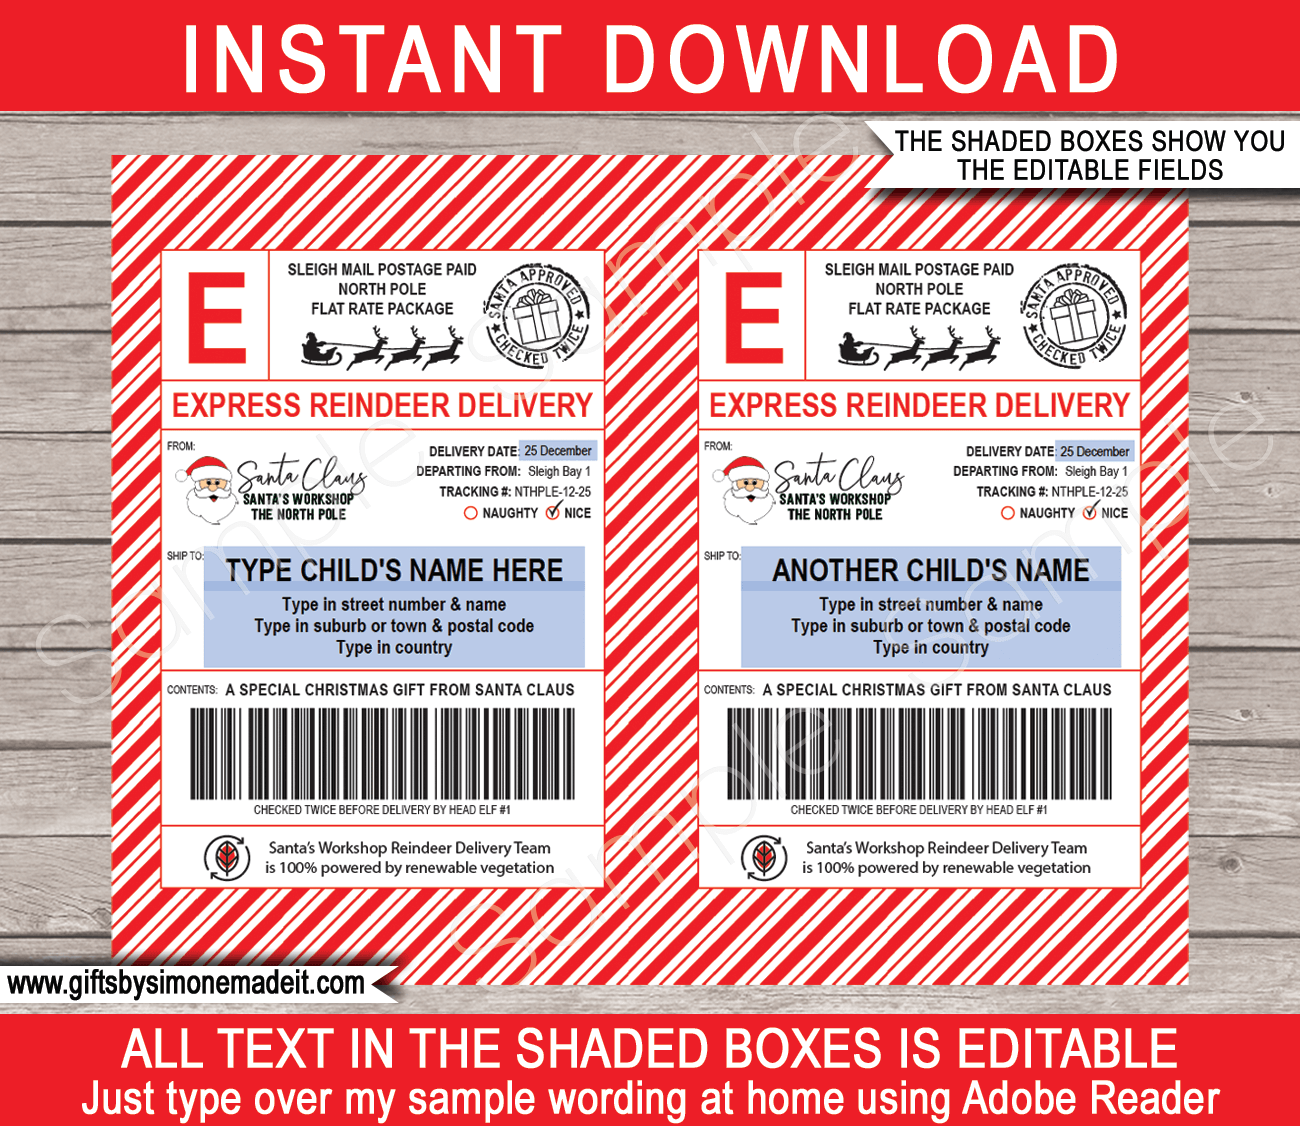 Santa Mail Shipping Labels Template | Printable North Pole Post Stickers | Name & Address Labels from Santa | Sleigh Mail | Christmas Tags | North Pole Post Office | Santa's Workshop | DIY Custom Editable Text | INSTANT DOWNLOAD via giftsbysimonemadeit.com